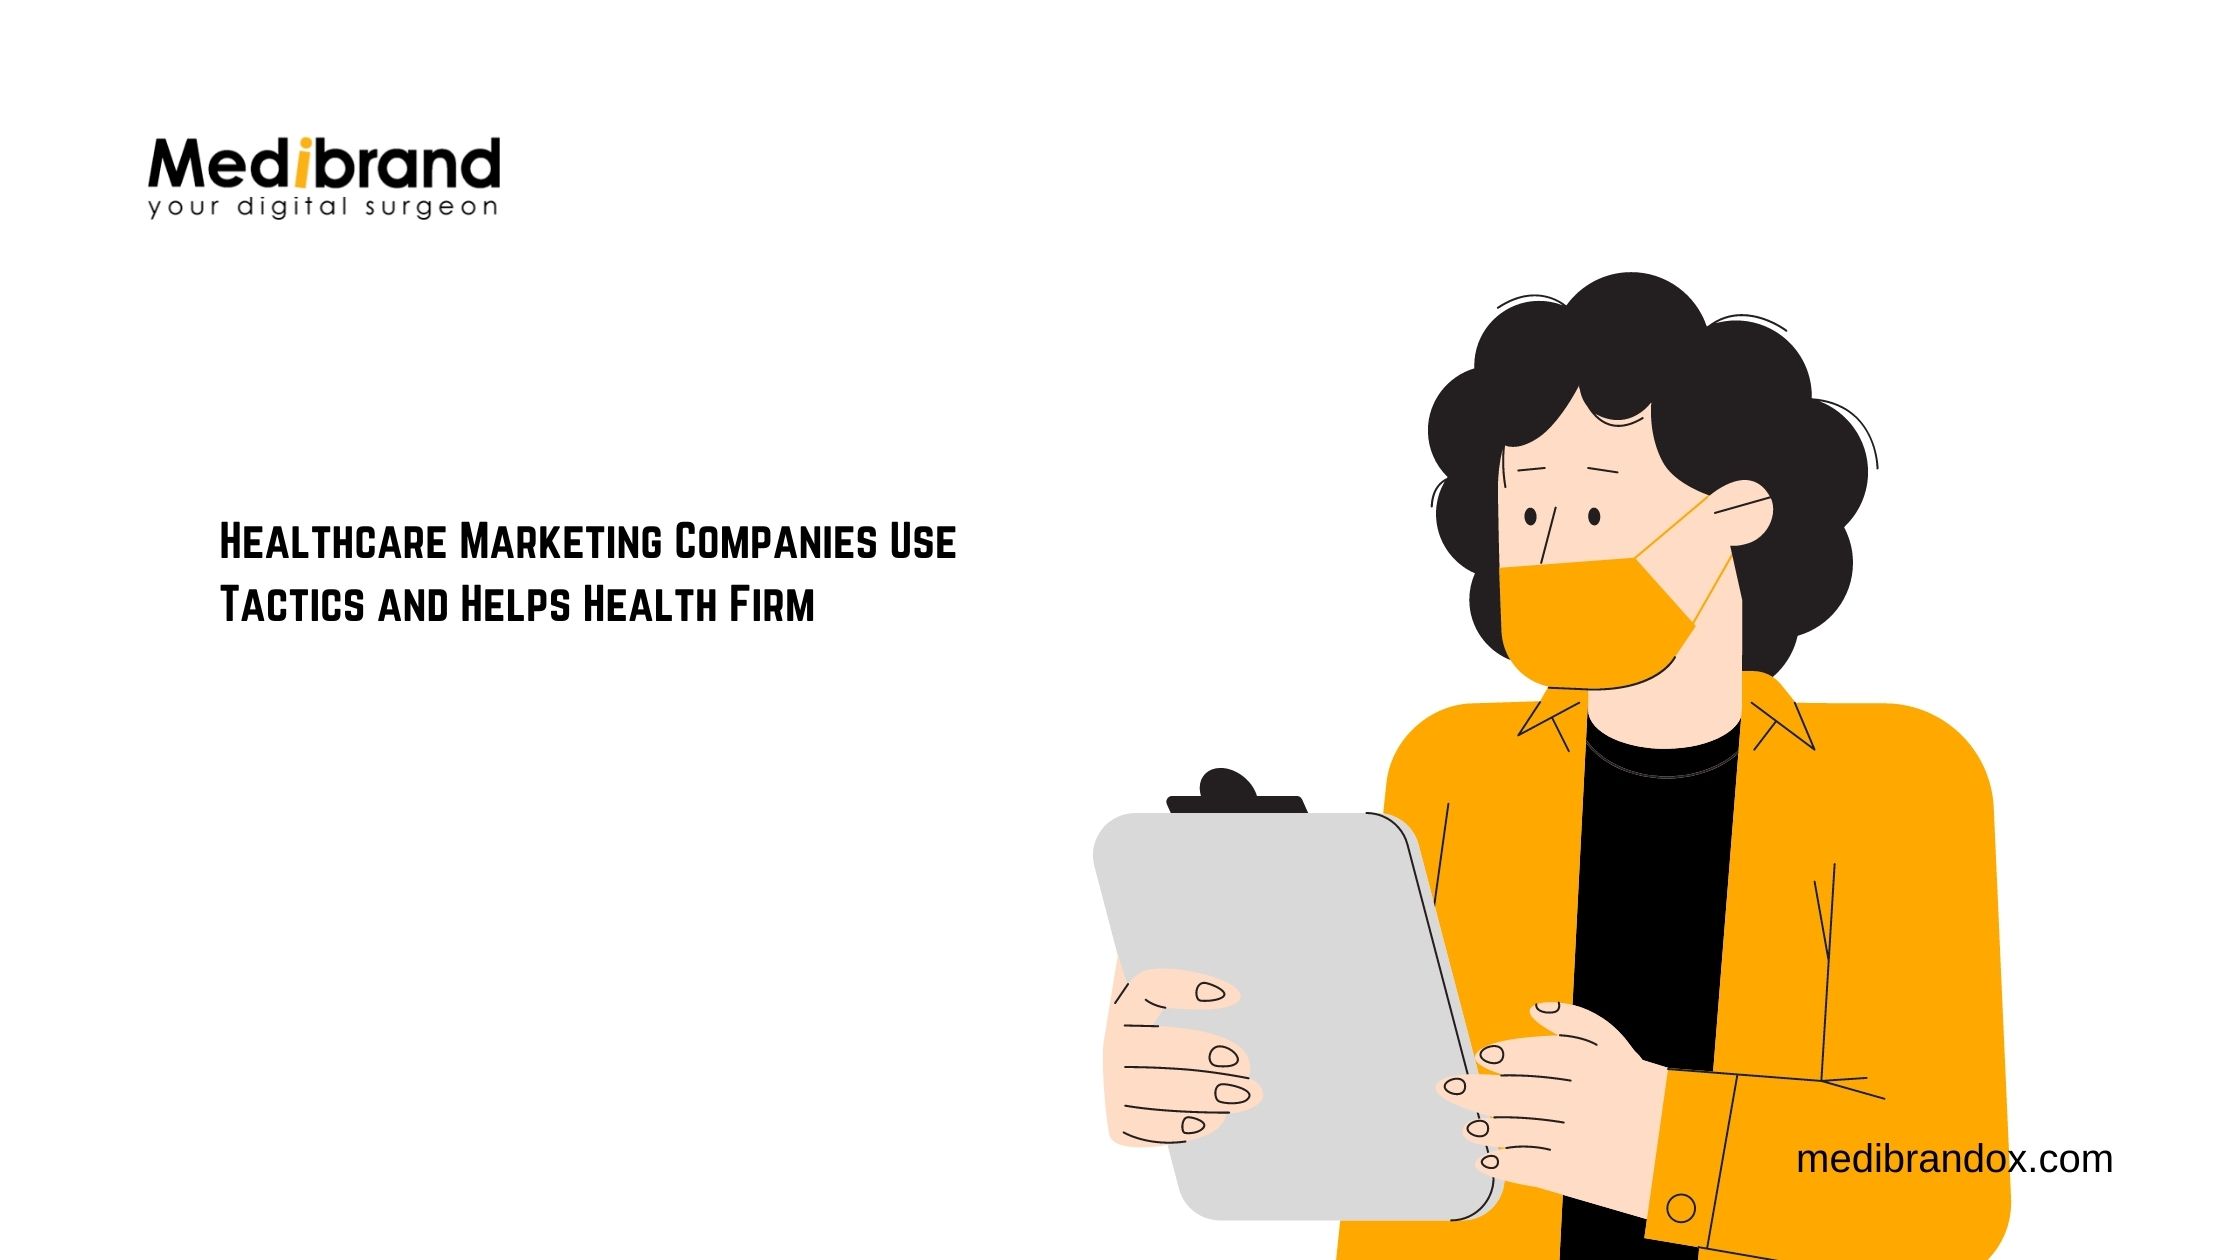 Article about Healthcare Marketing Companies Use Tactics and Helps Health Firm